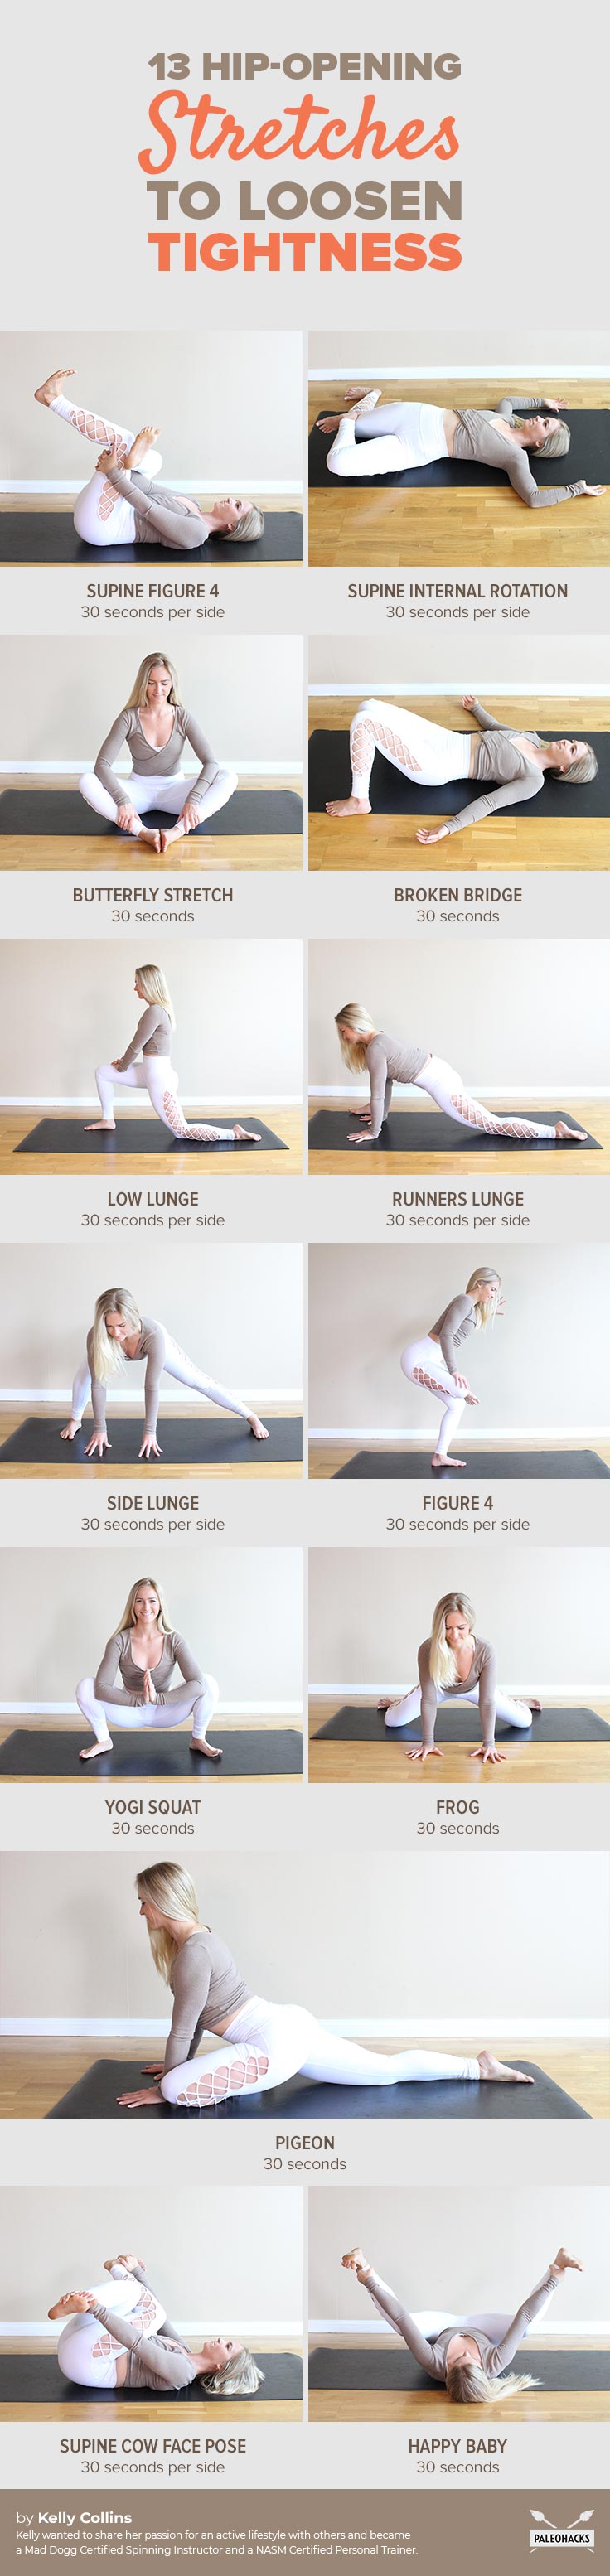 If you have tight glutes and legs from sitting all day, these gentle hip opening stretches can help reduce pain and stiffness.